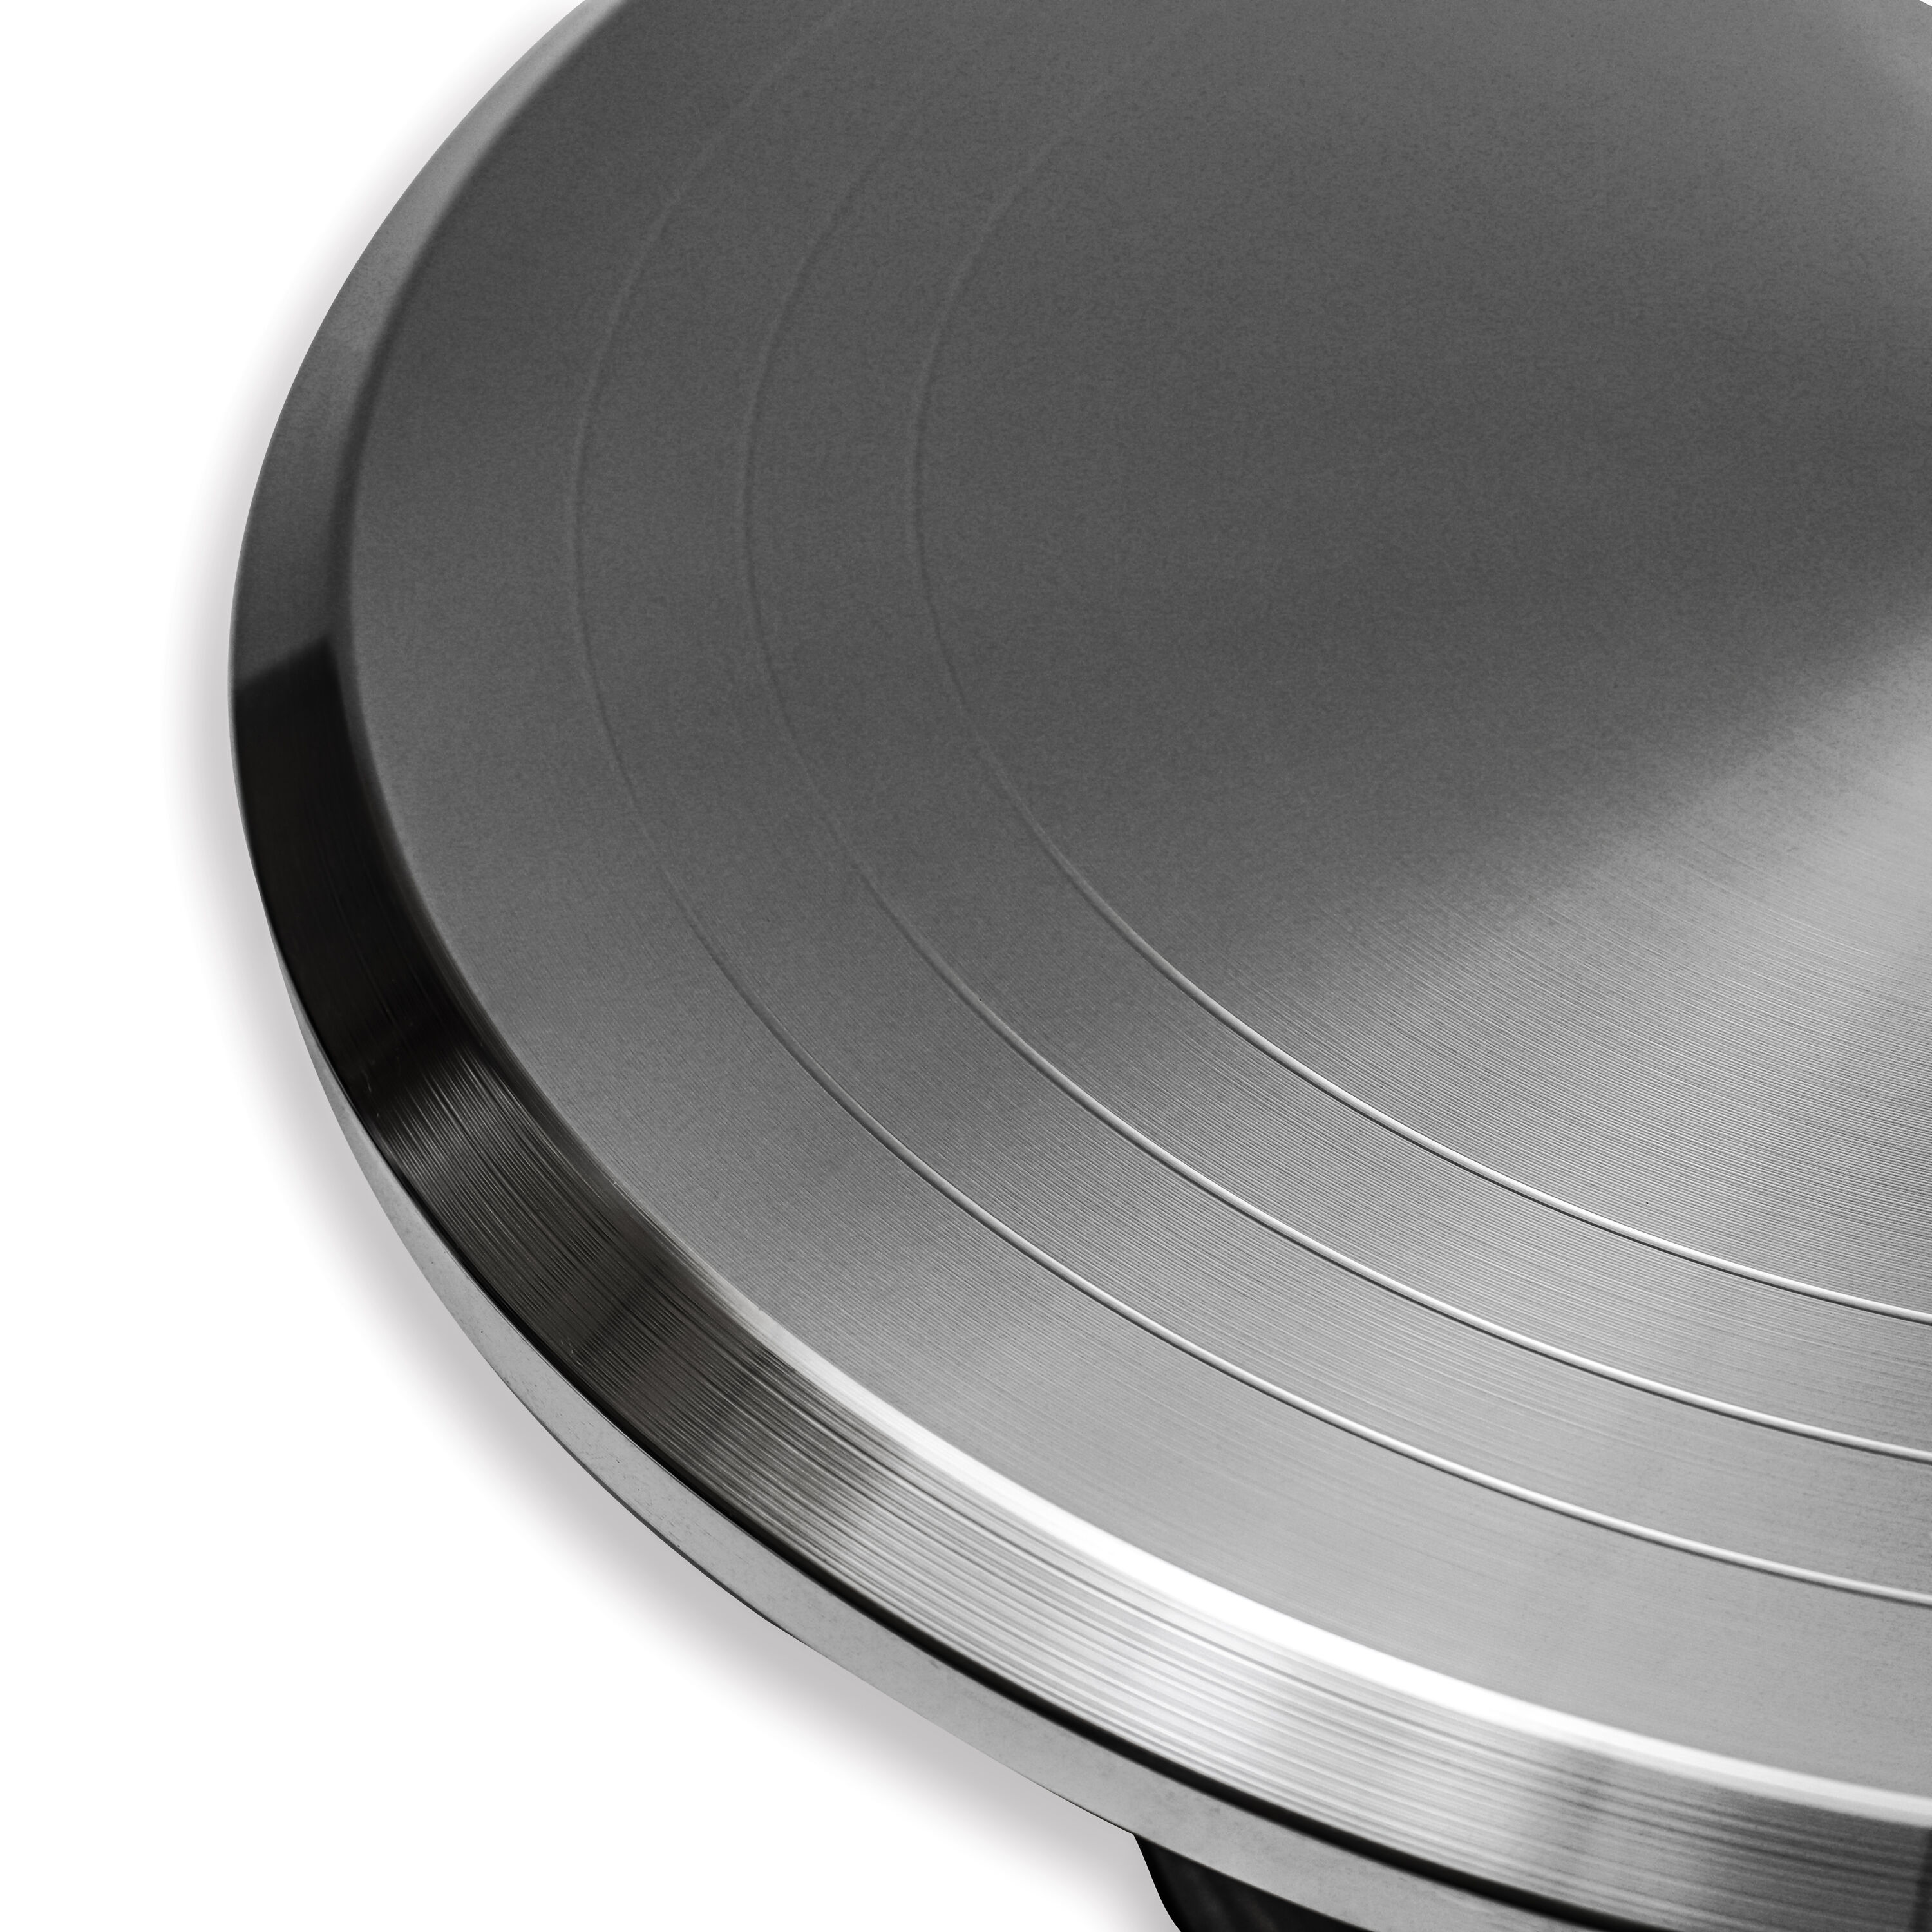 Mouthwatering Stainless Steel Cake Turntable to Relish at Any Time 